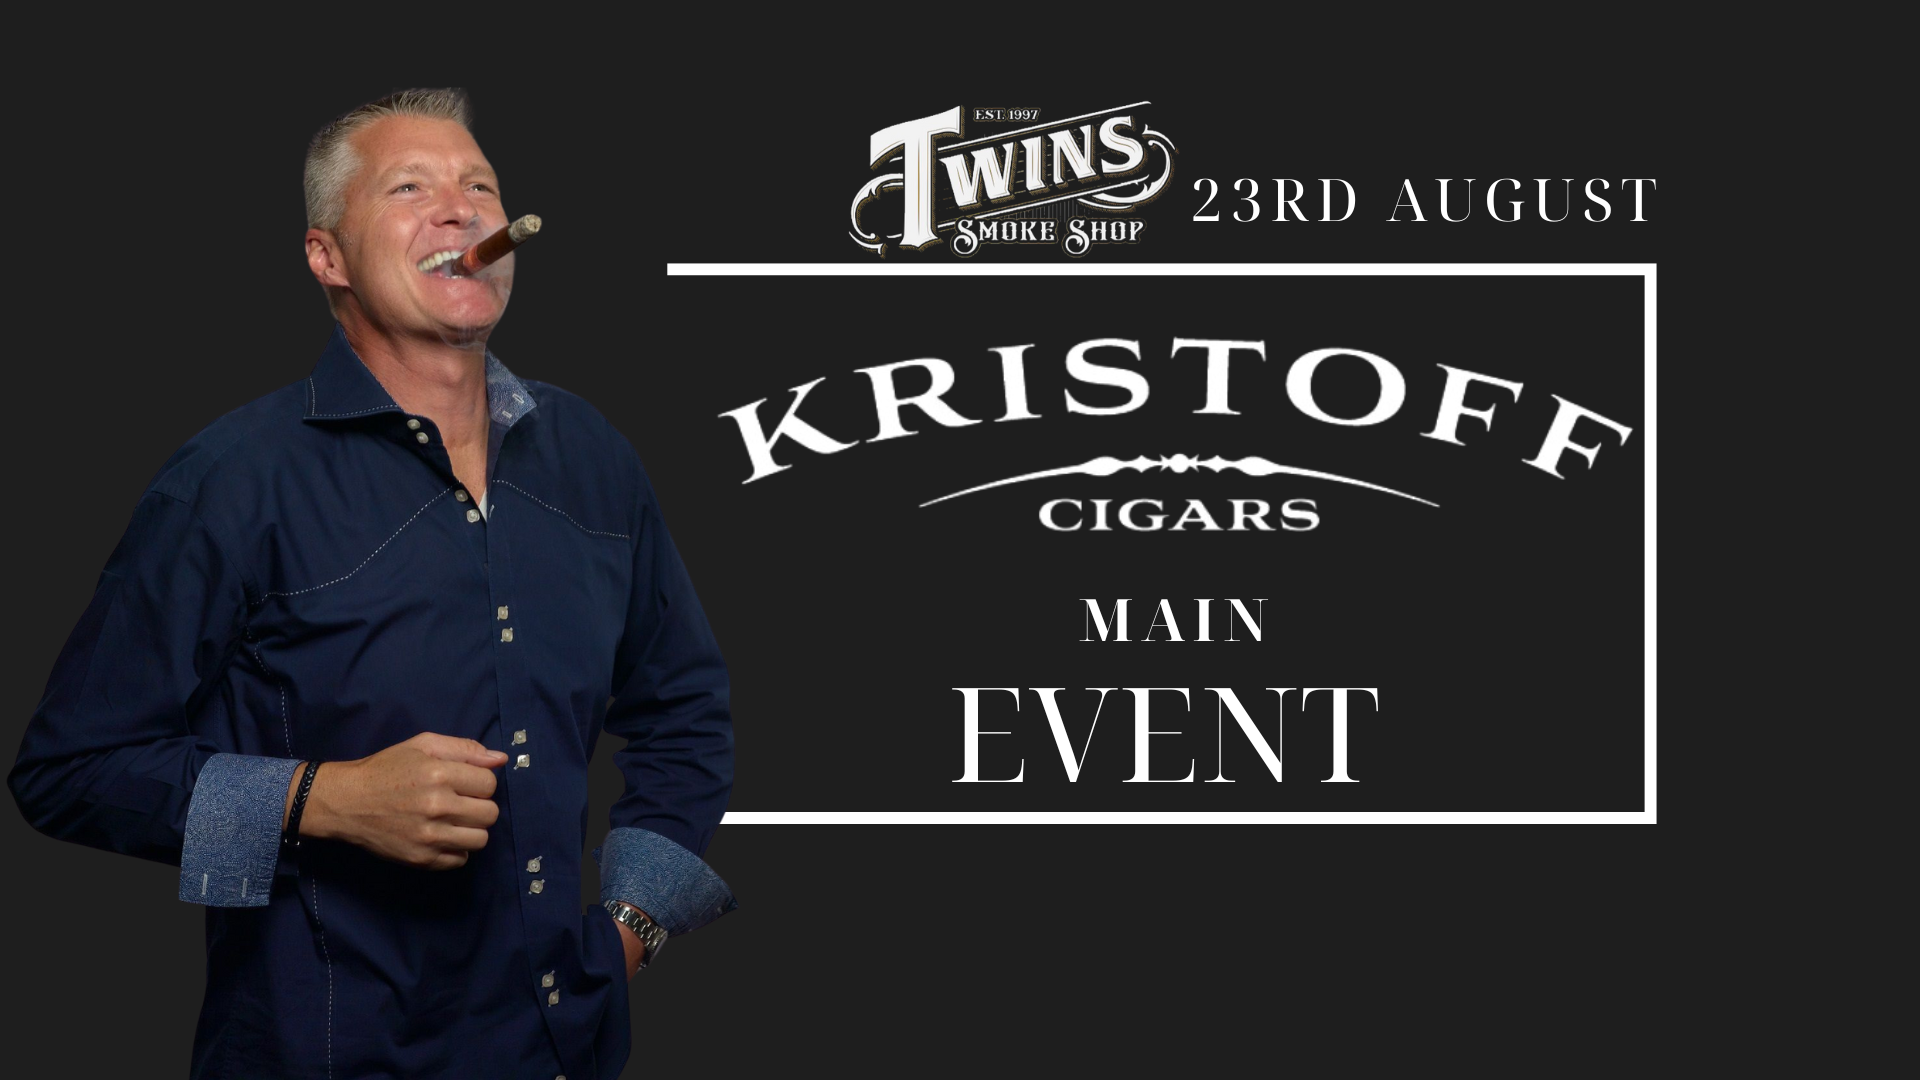 Kristoff Cigars | August Events!